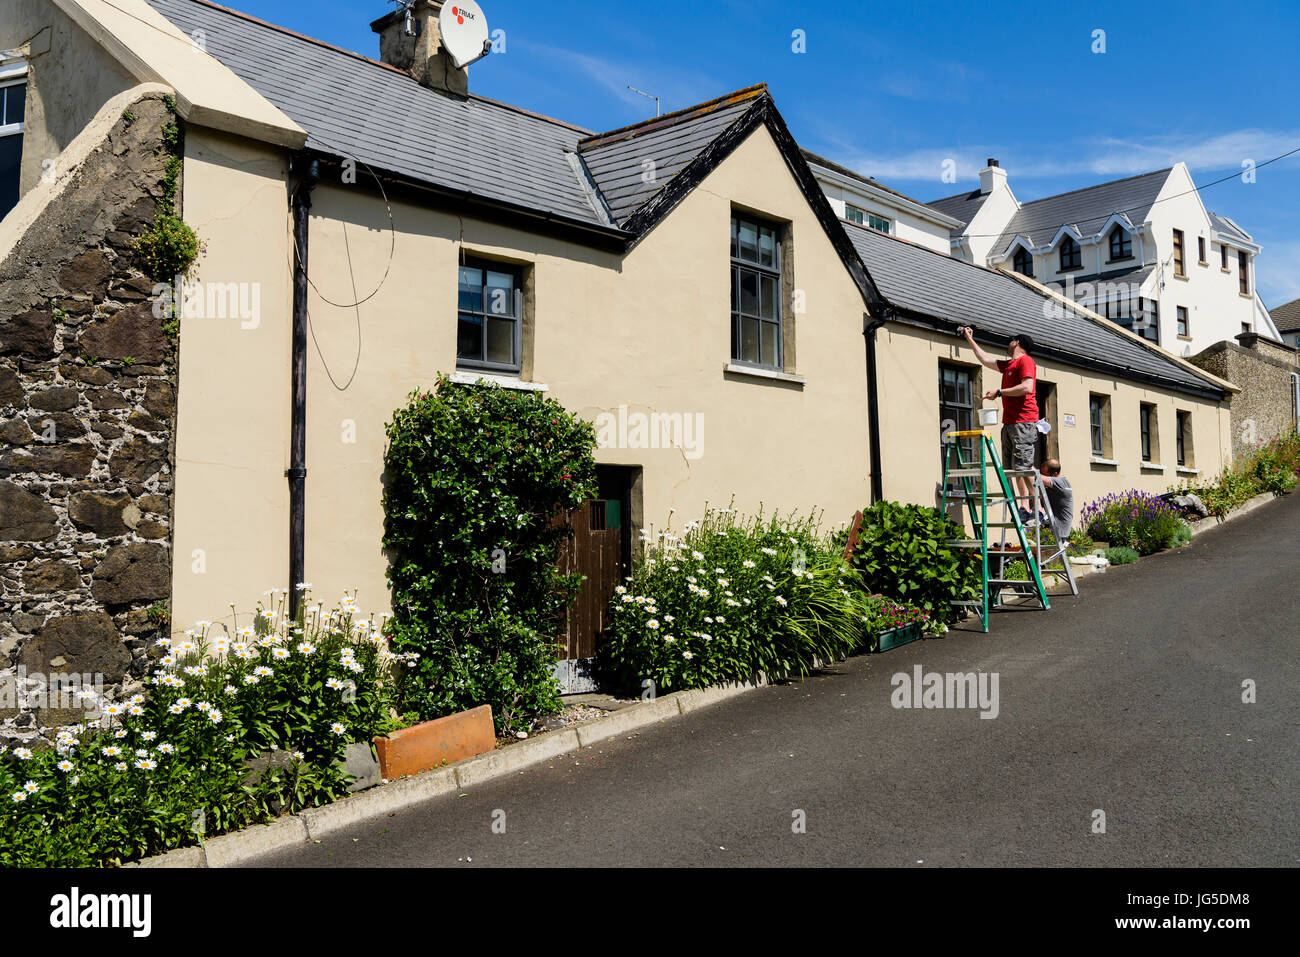 Two men painters painting a picturesque cottage on a steep hill road. Stock Photo